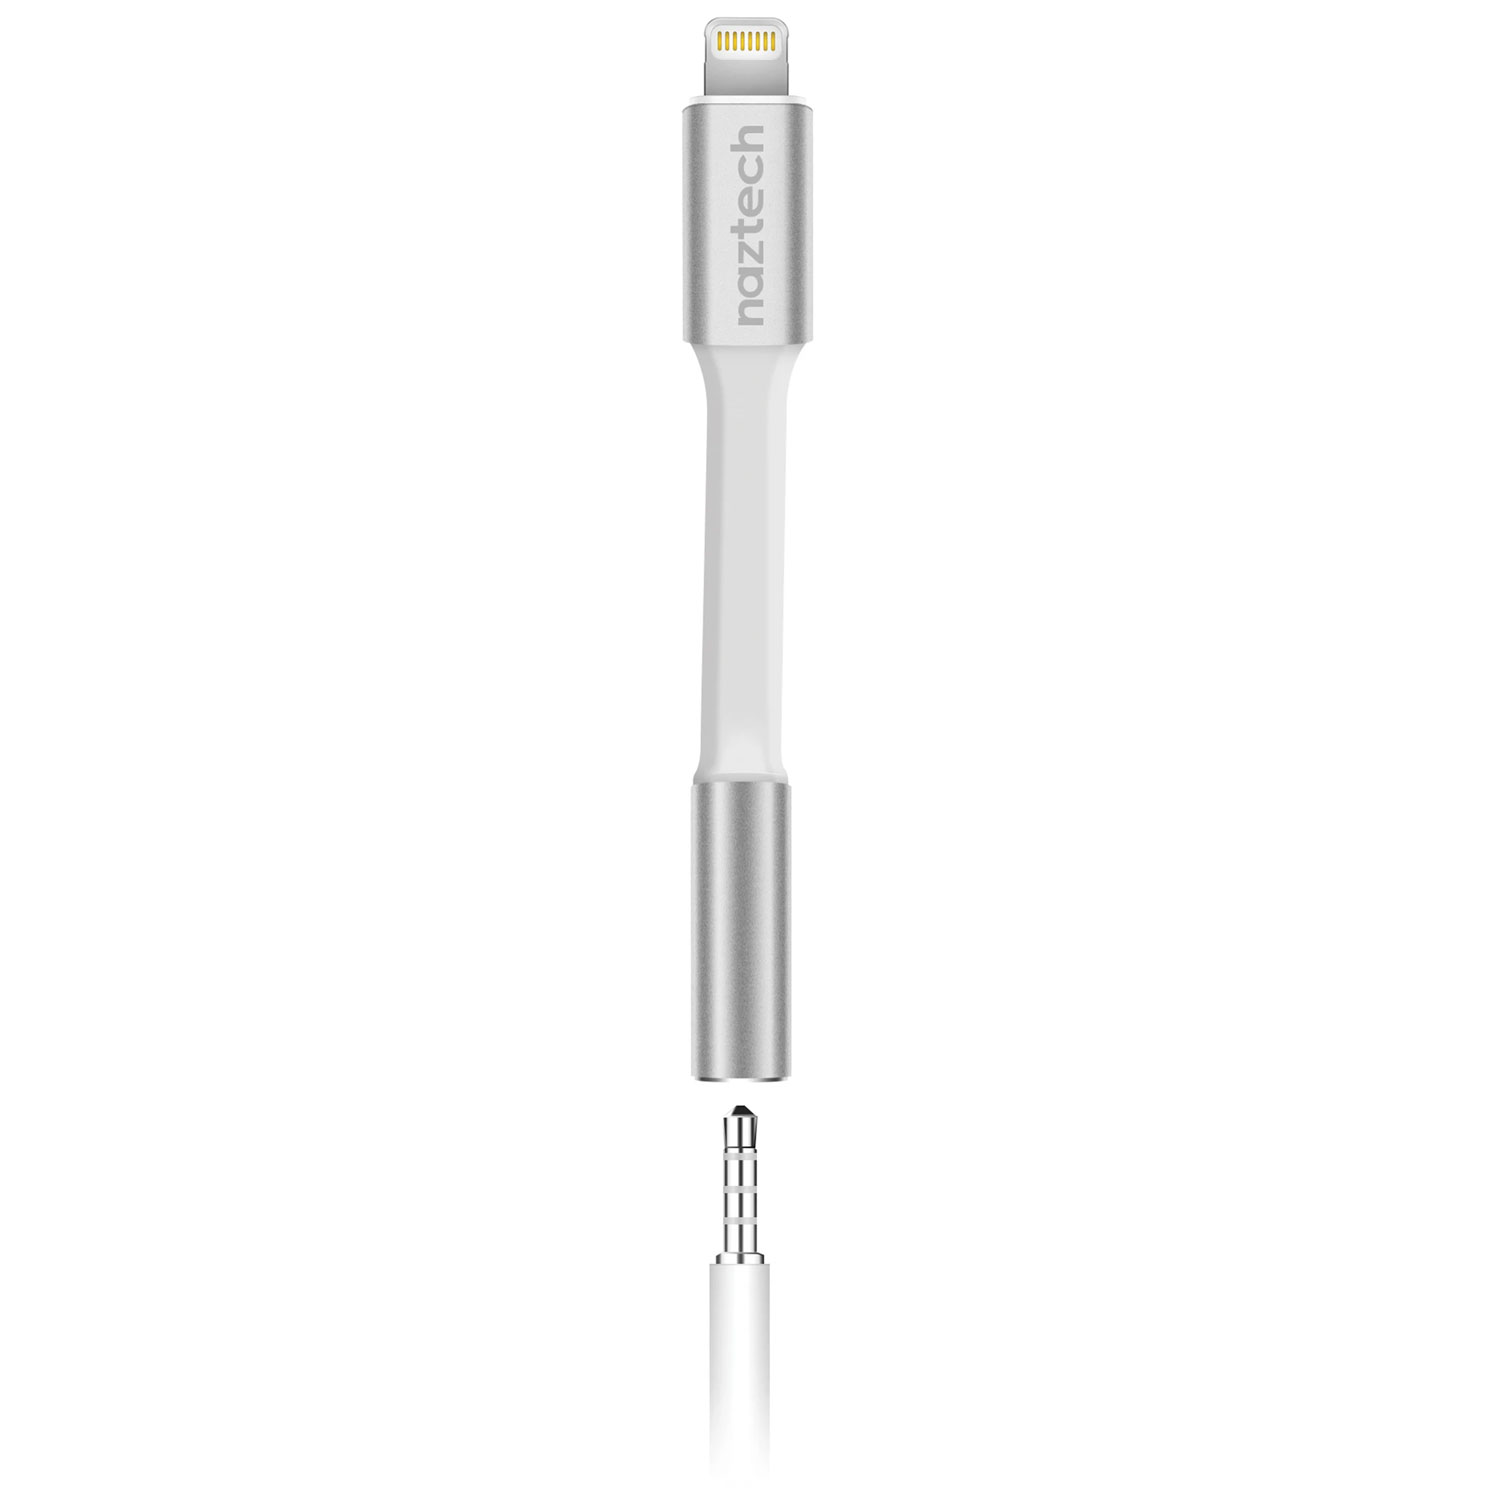 Audio Adapter With Lightning Connector 3.5mm